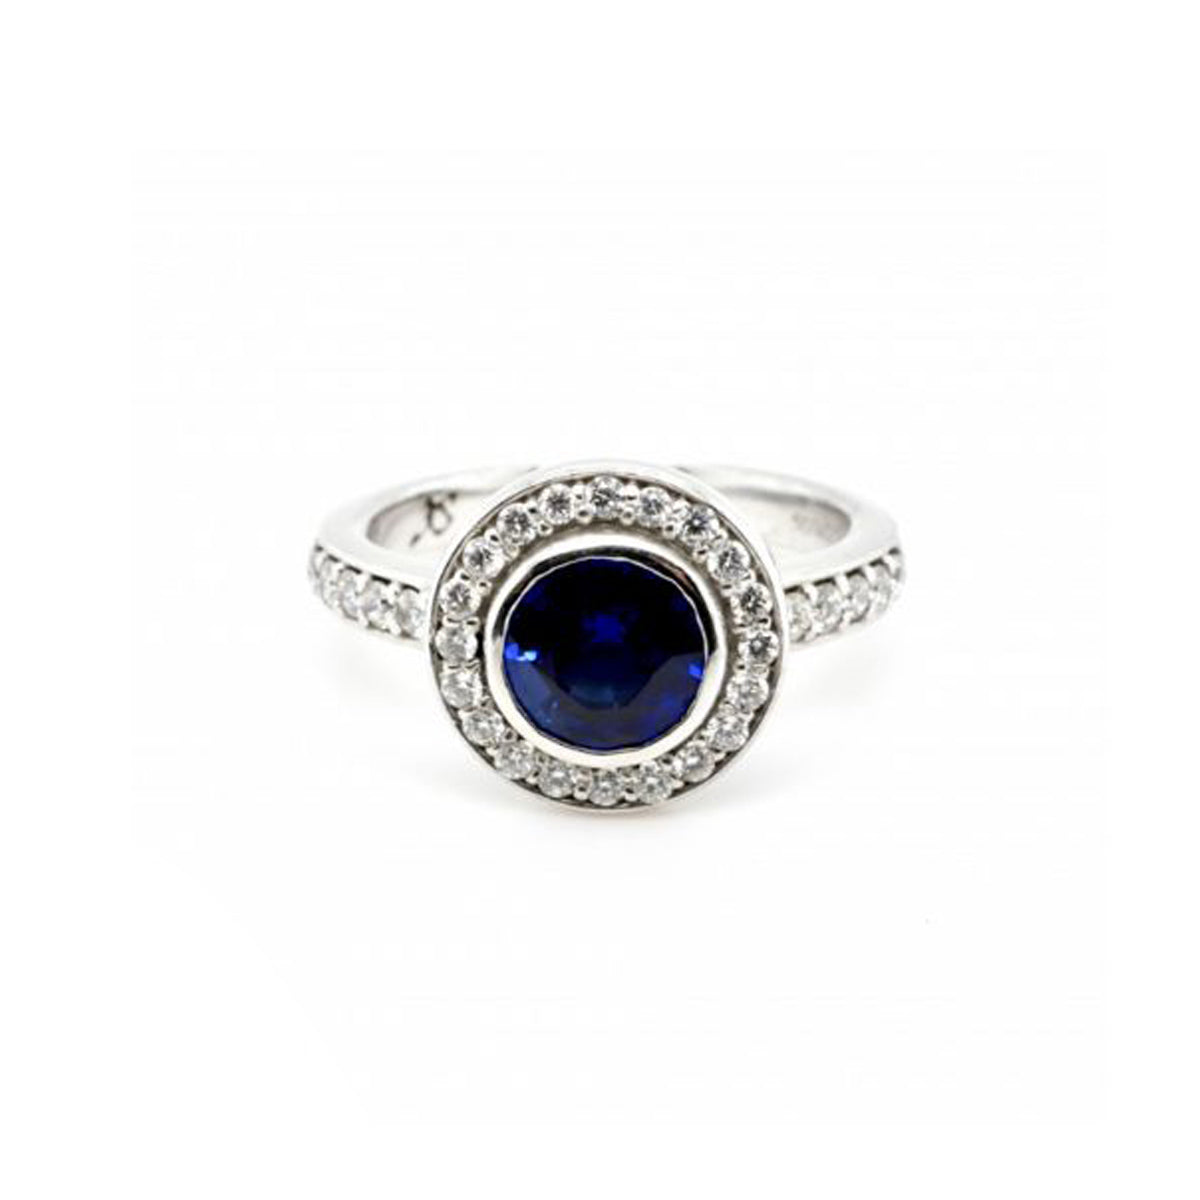 18ct White Gold Sapphire and Diamond Halo Ring